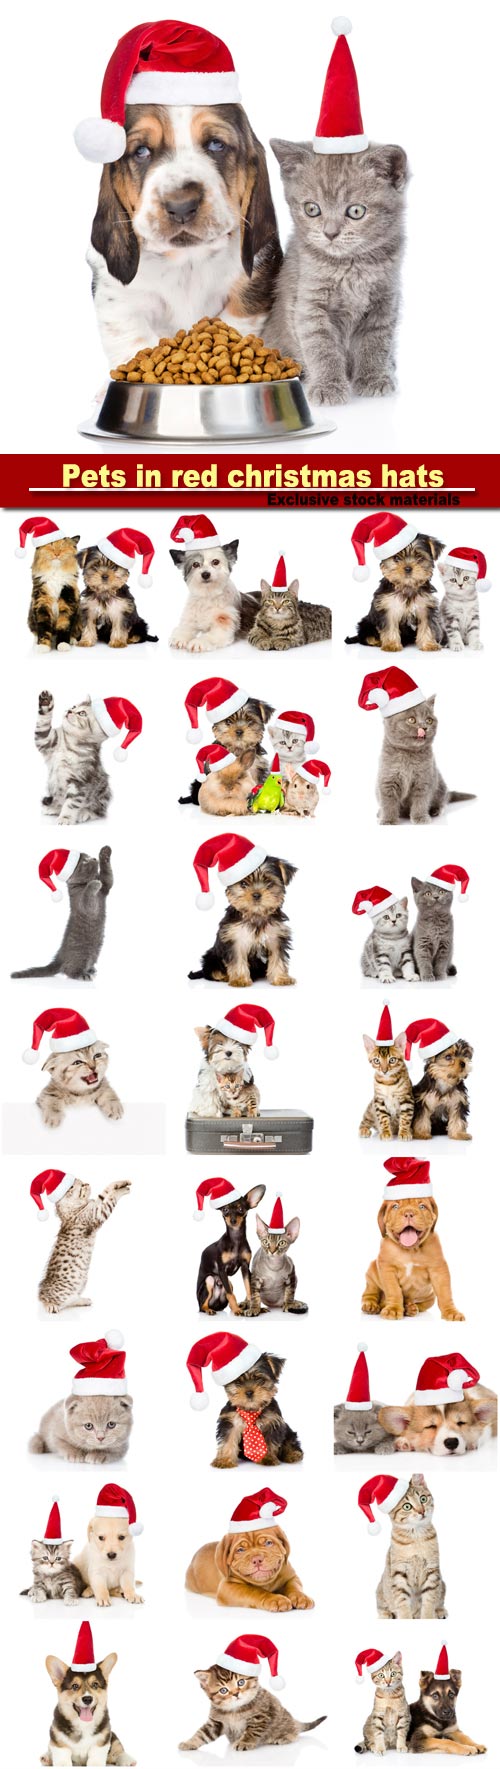 Group of pets in red christmas hats, isolated on white background